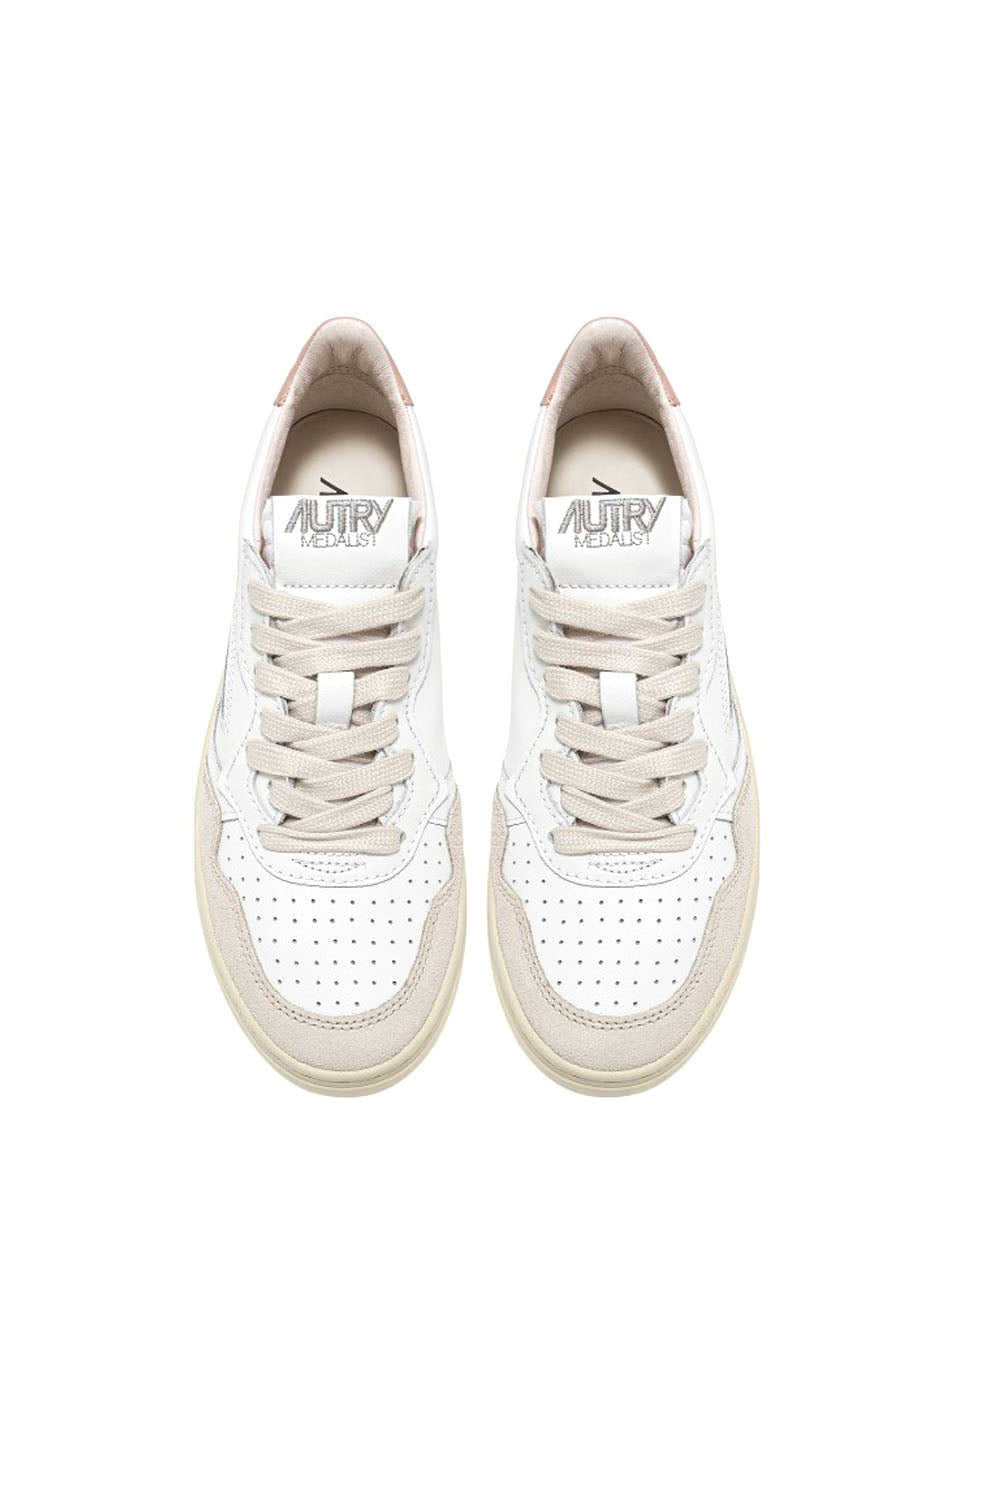  Autry Sneakers Medalist Low Whitepink Donna - 4